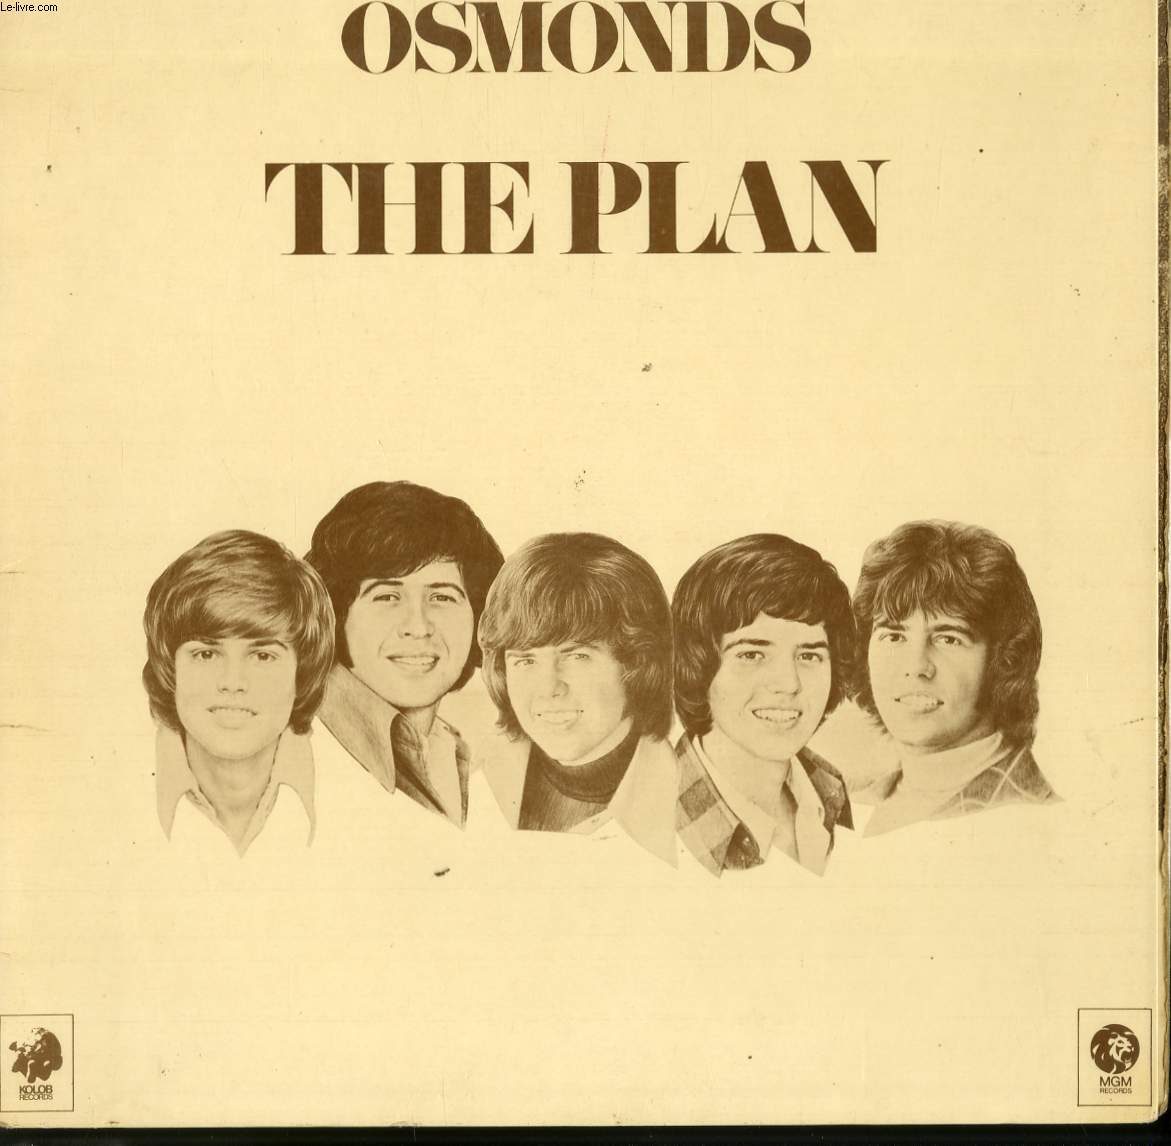 DISQUE VINYLE 33T THE PLAN. TRAFFIC IN MY MIND / ONE WAY TICKET TO ANYWHERE / BEFORE THE BEGINNING / MOVIE MAN / WAR IN HEAVEN / THE LAST DAYS / MIRROR, MIRROR / DARLIN' / IT'S ALRIGHT / ARE YOU UP THERE? / LET ME IN / GOIN'HOME.